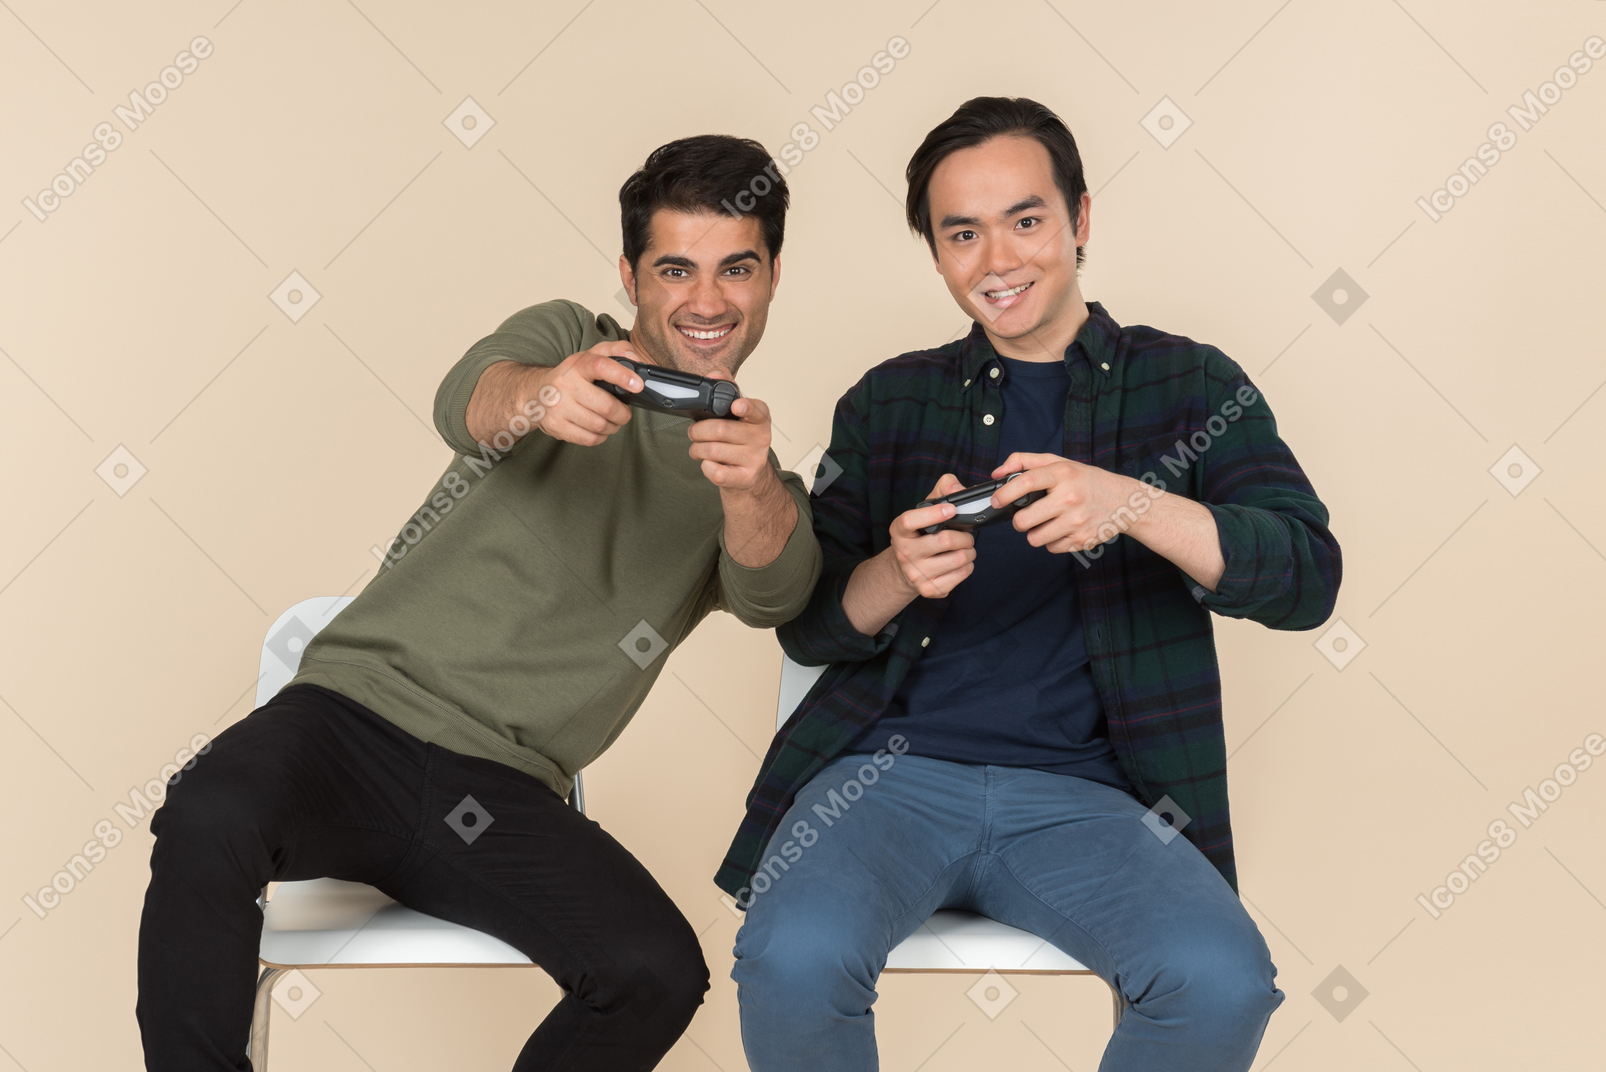 Excited interracial friends sitting in chairs and playing video games